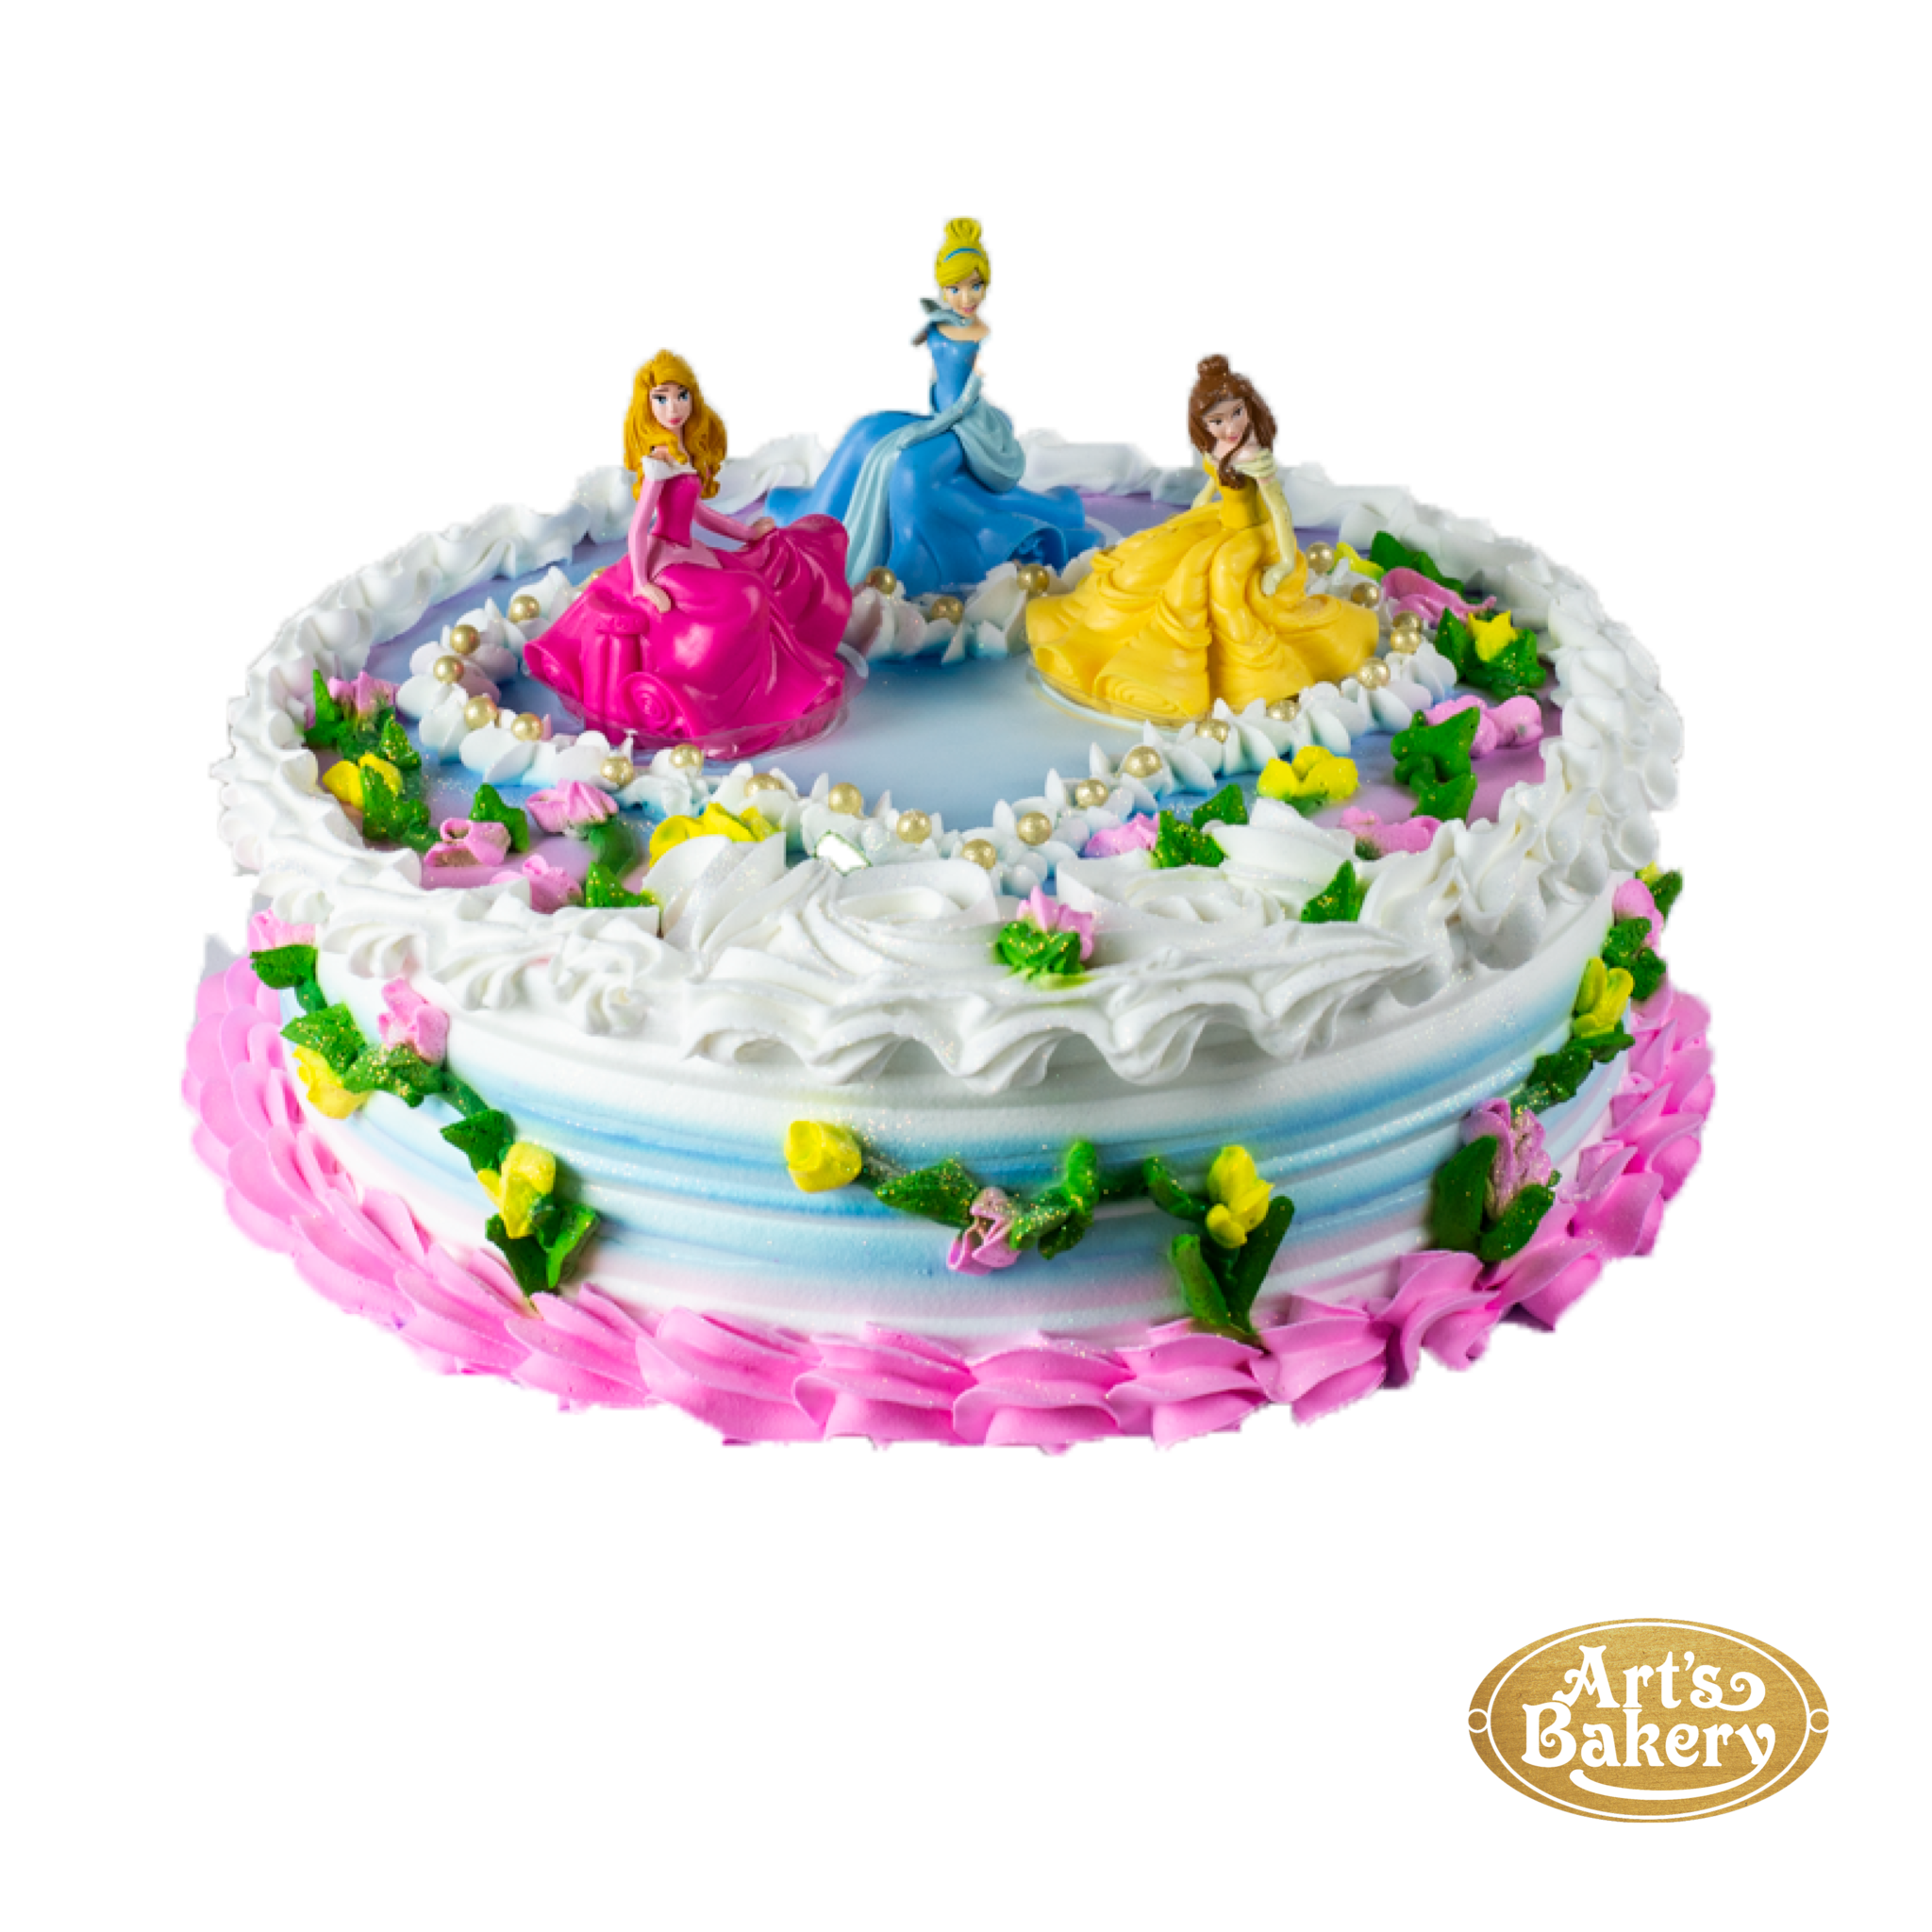 Princess Birthday Cake | Sweets home delivery in Mauritius